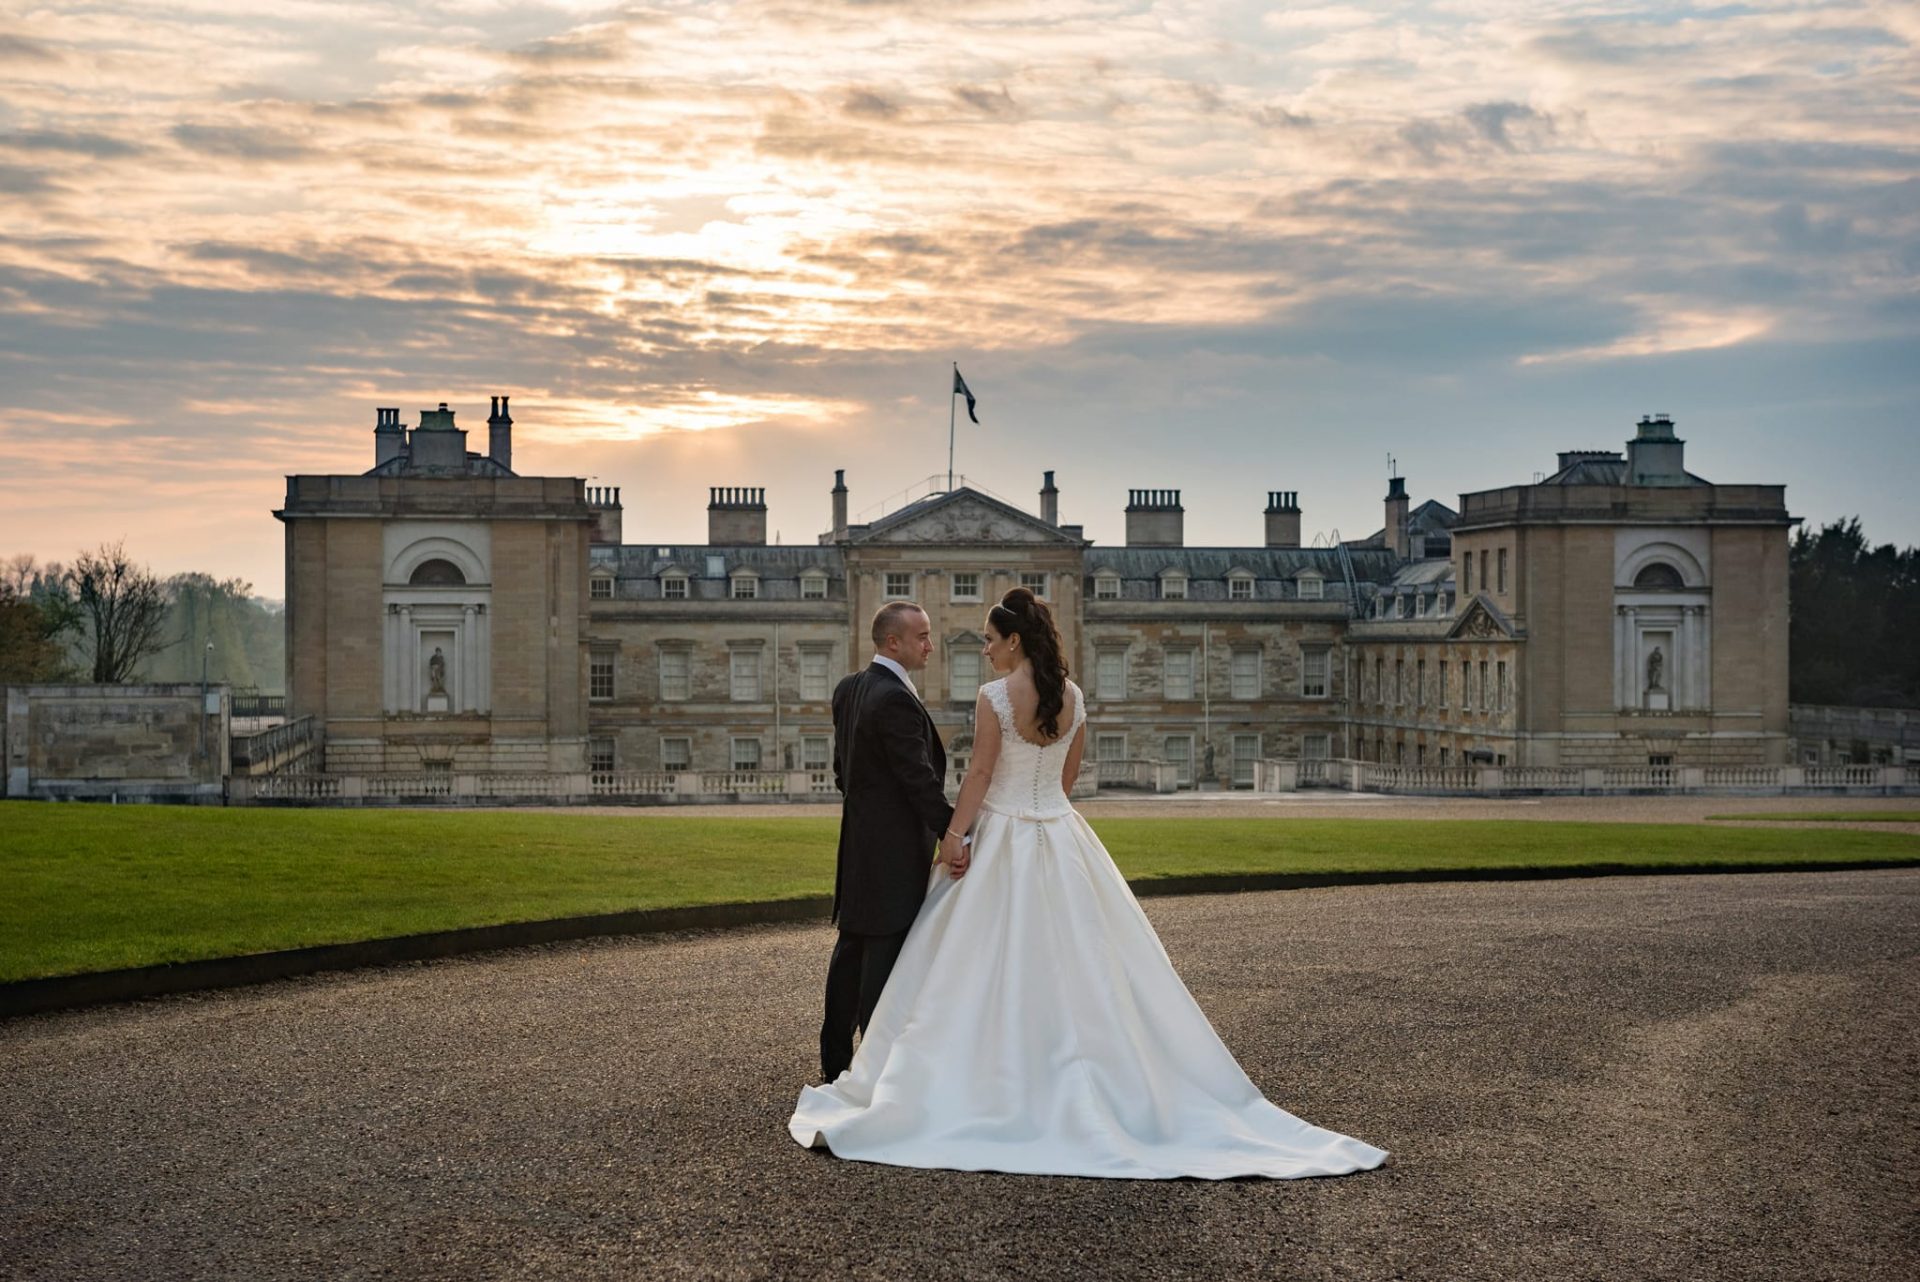 Bride and groom in front of Woburn Abbey at sunset